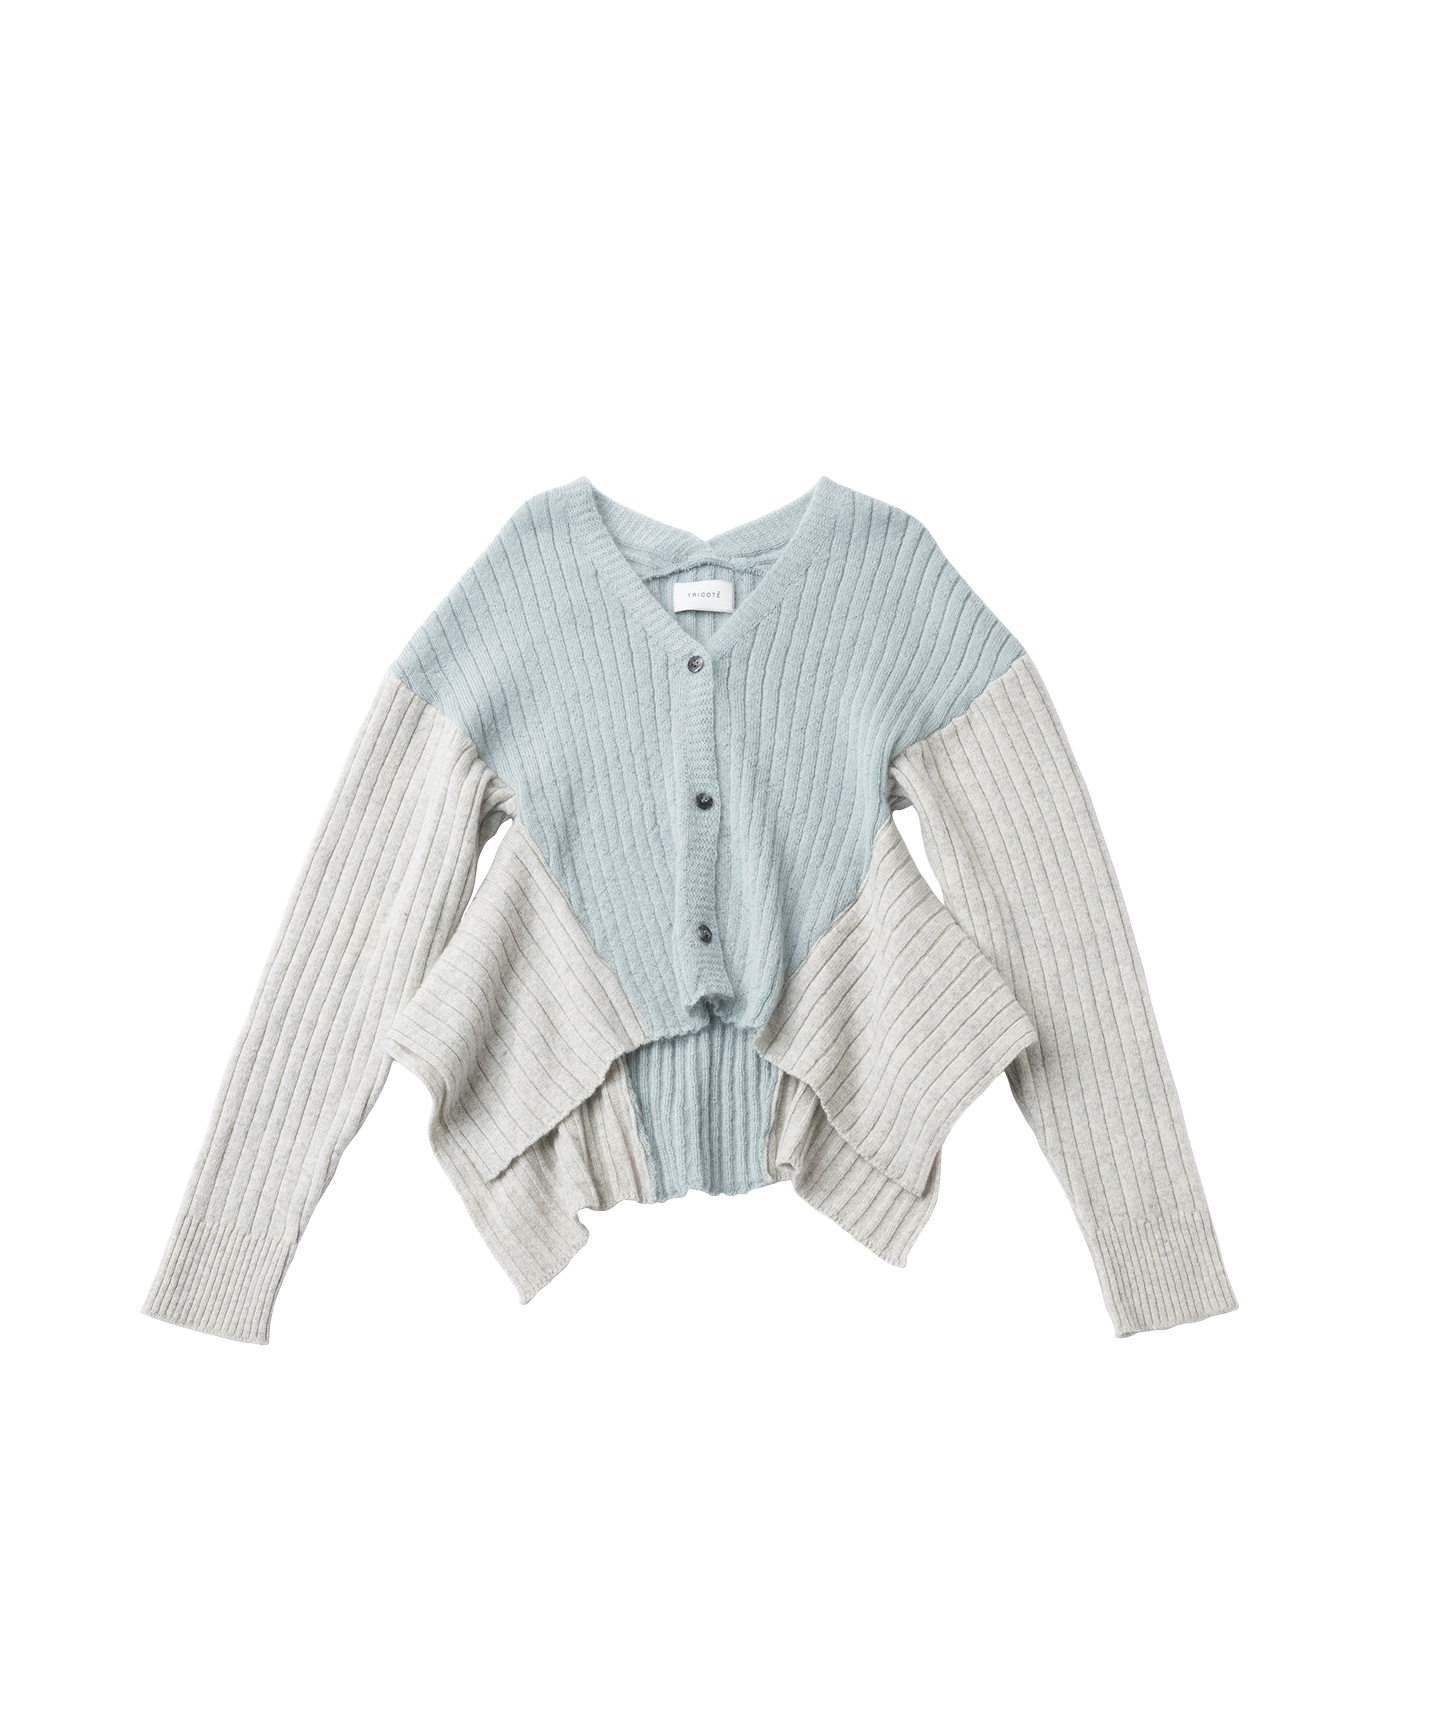 【OUR LEGACY】 CARDIGAN　BABY BLUE MOHAIR